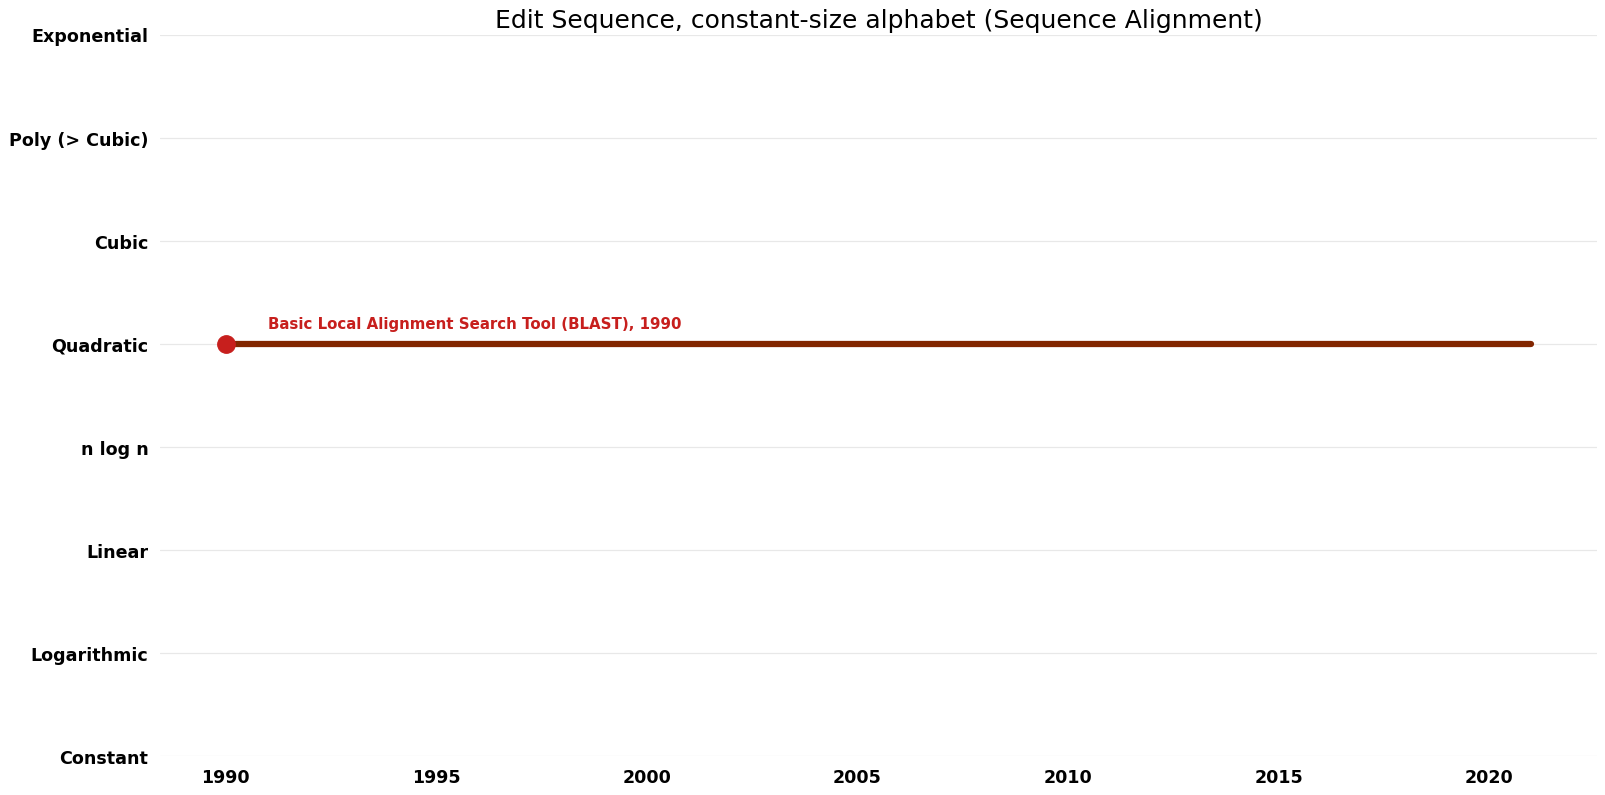 Sequence Alignment - Edit Sequence, constant-size alphabet - Space.png